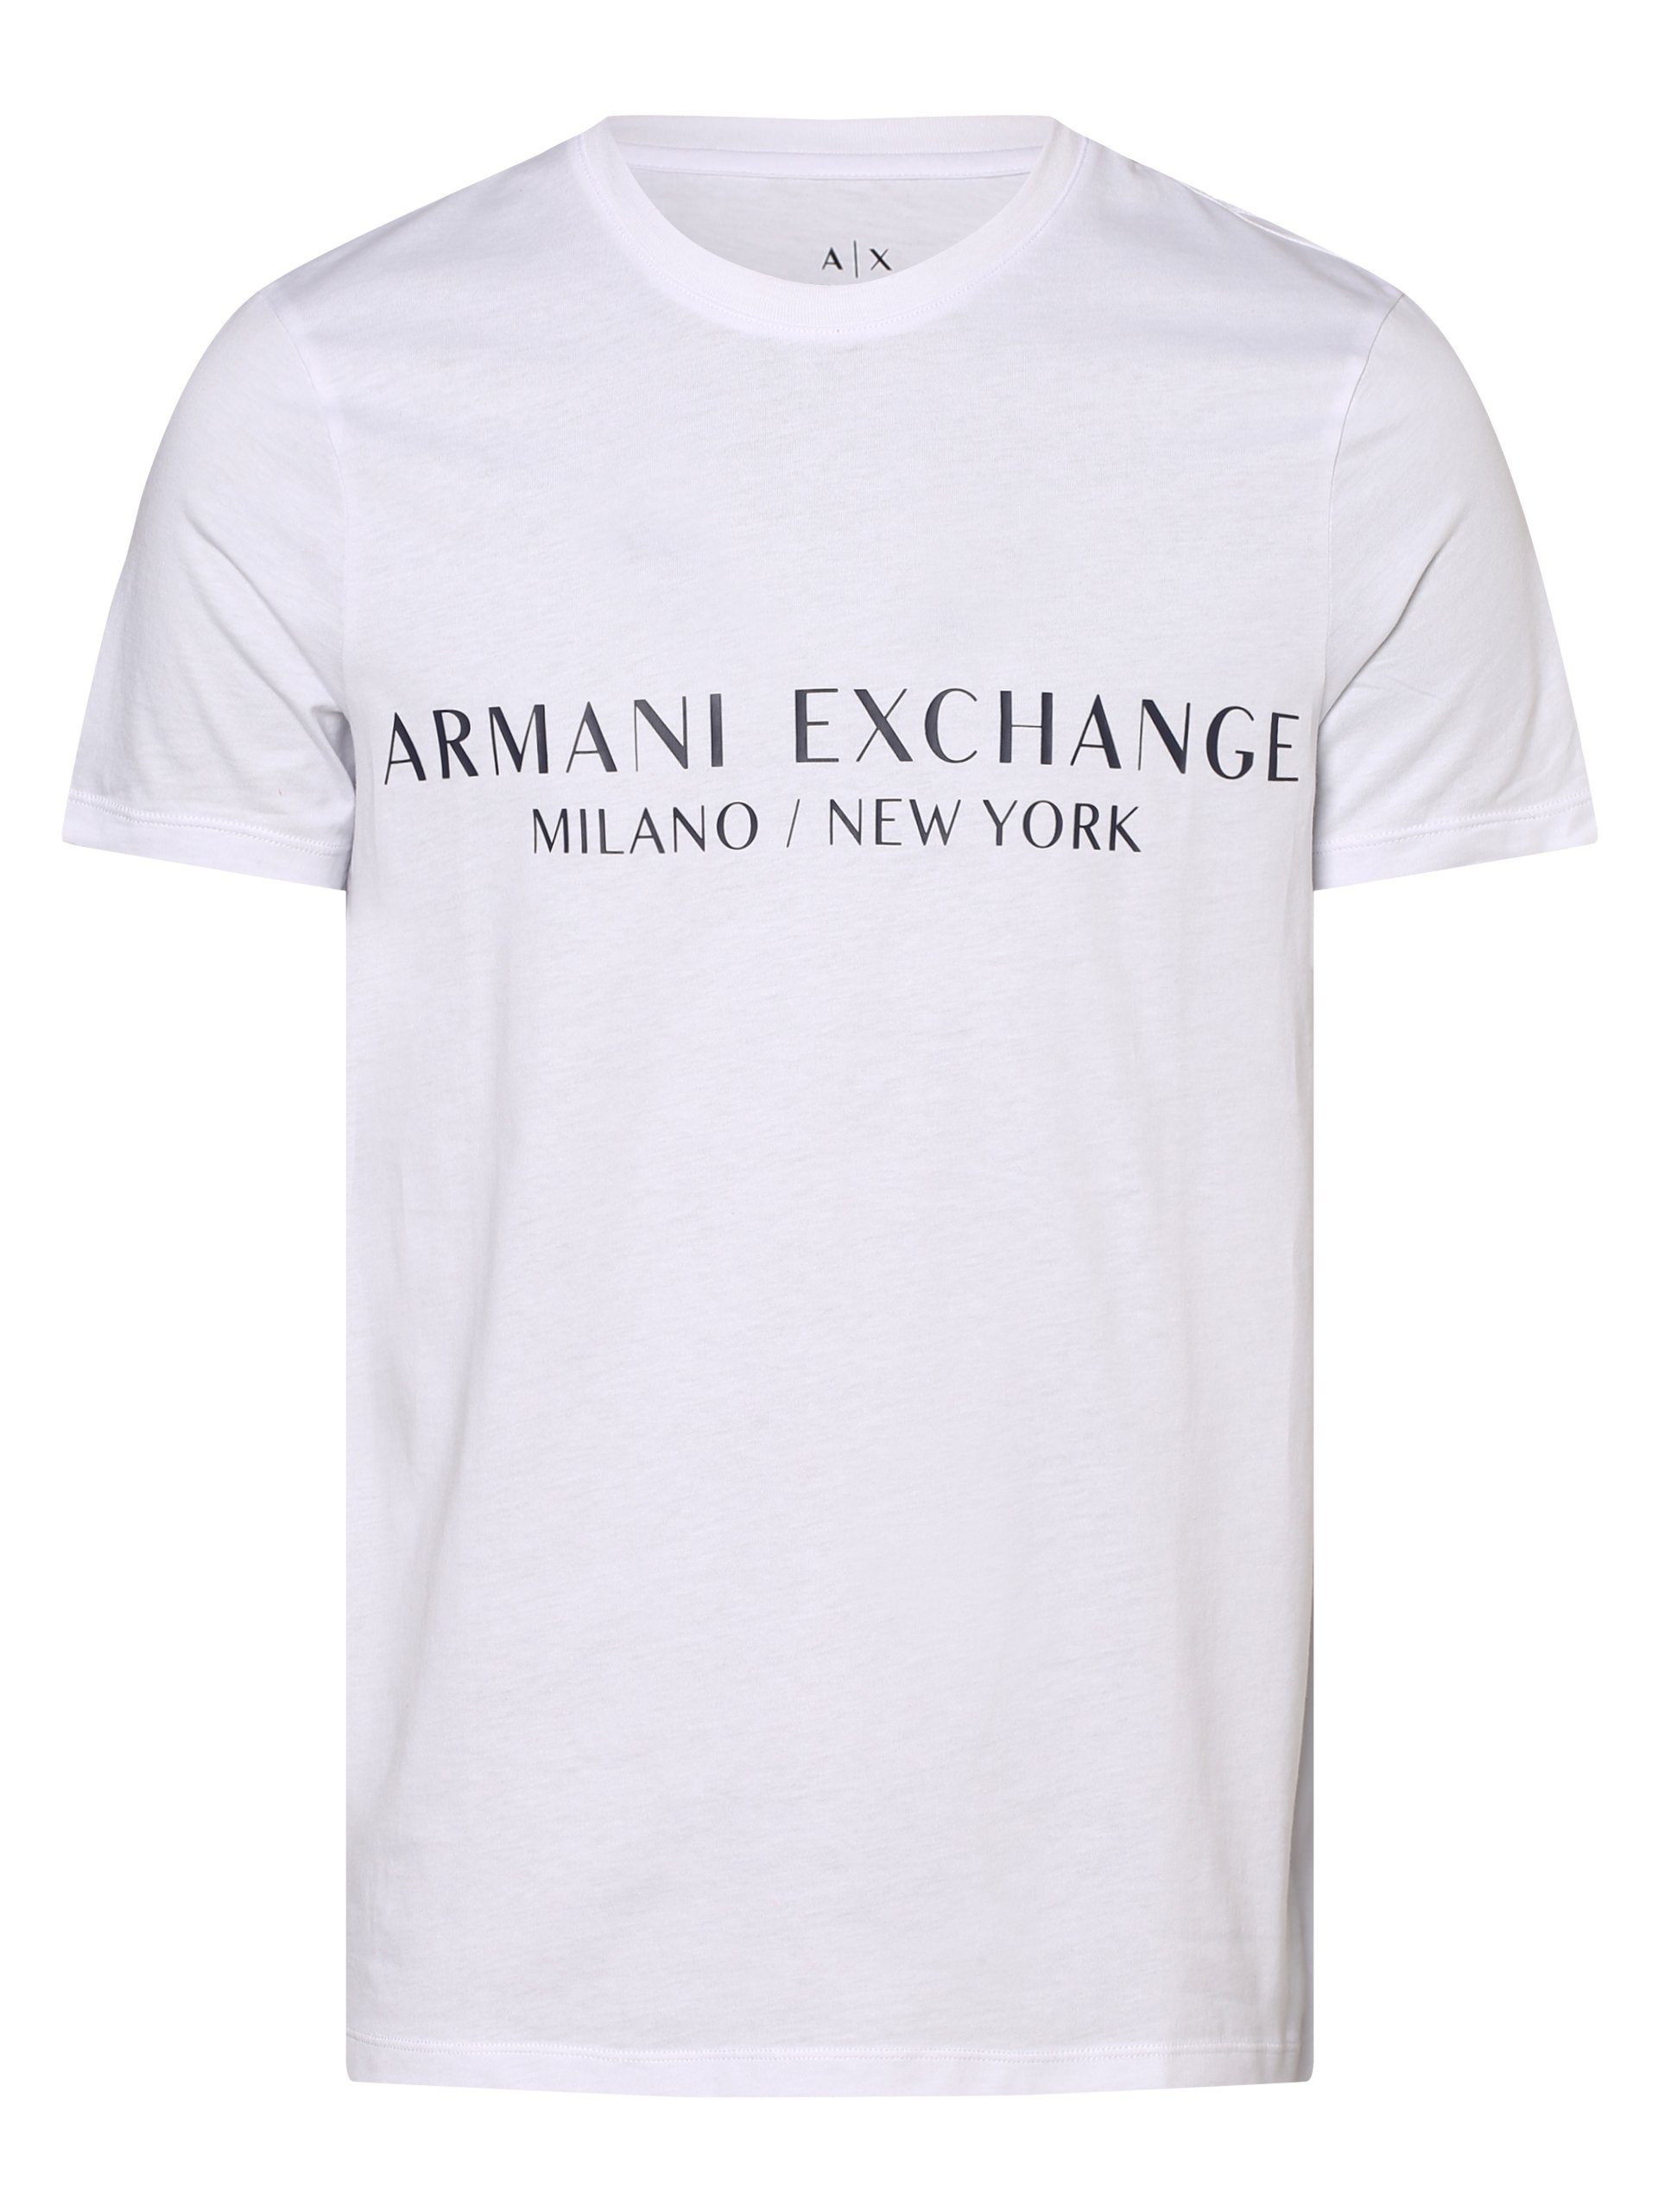 Armani Exchange Connected T-Shirt weiß